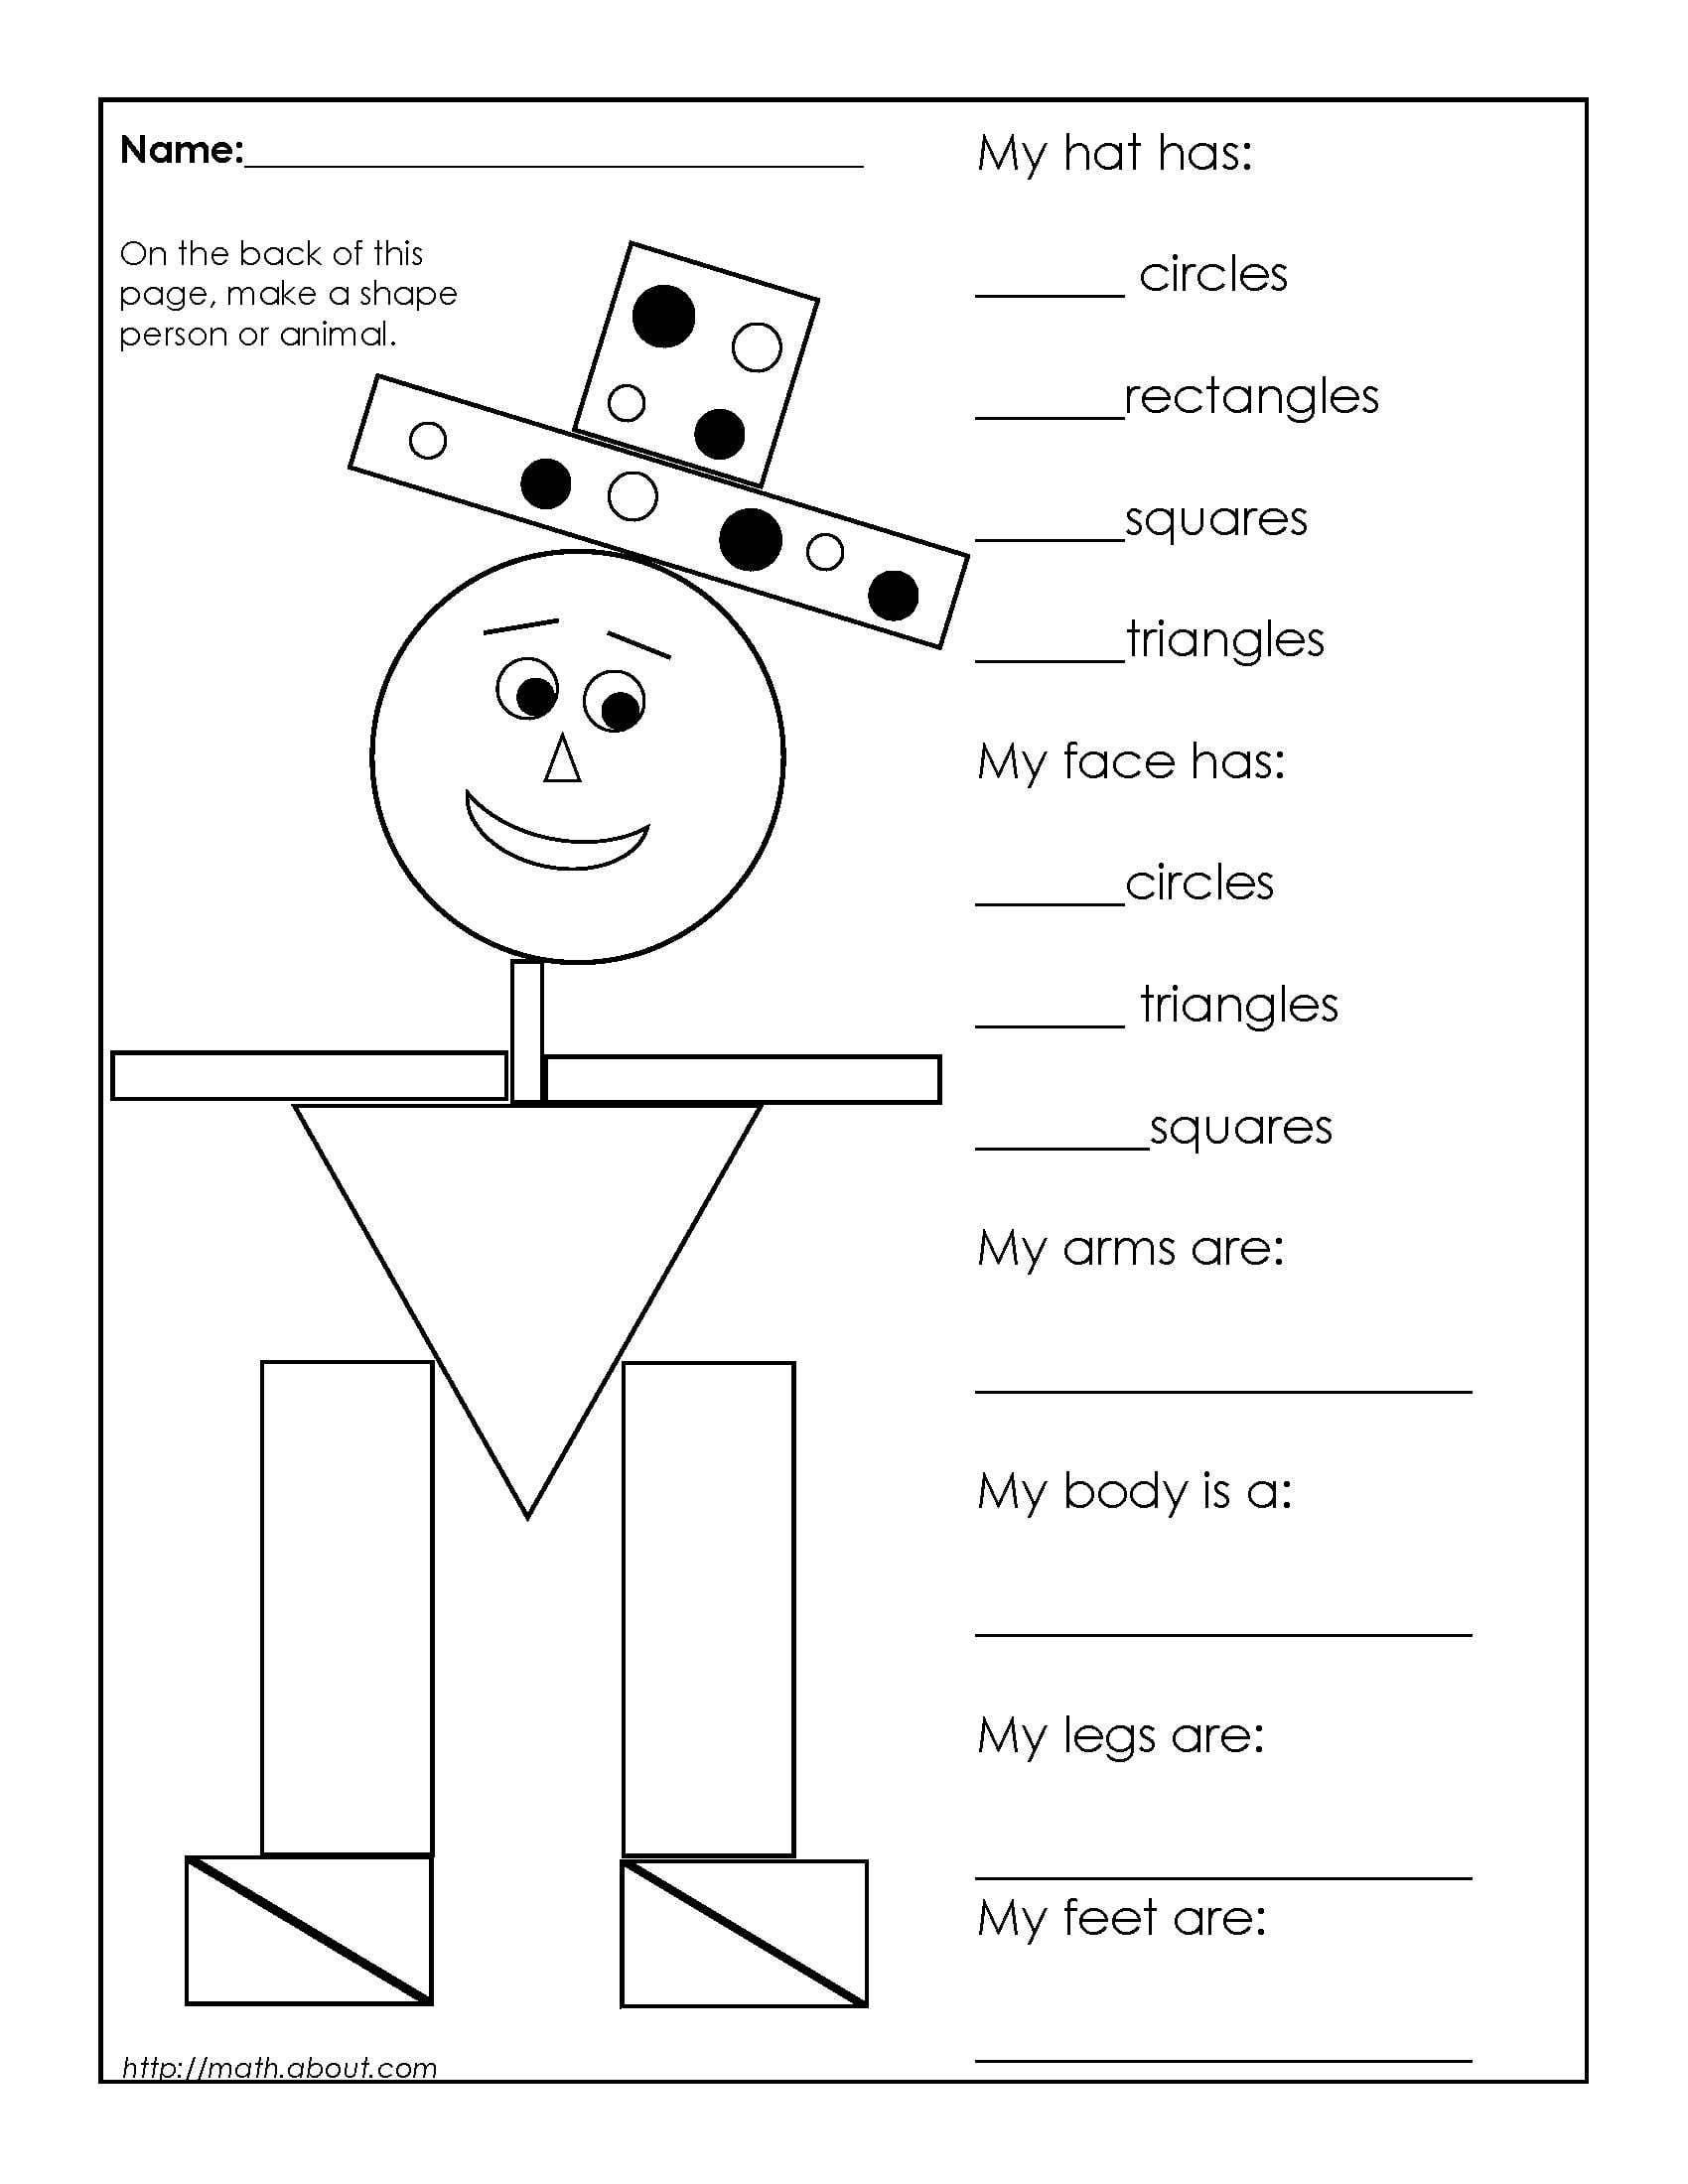 Polygon Worksheets for 2nd Grade 1st Grade Geometry Worksheets for Students